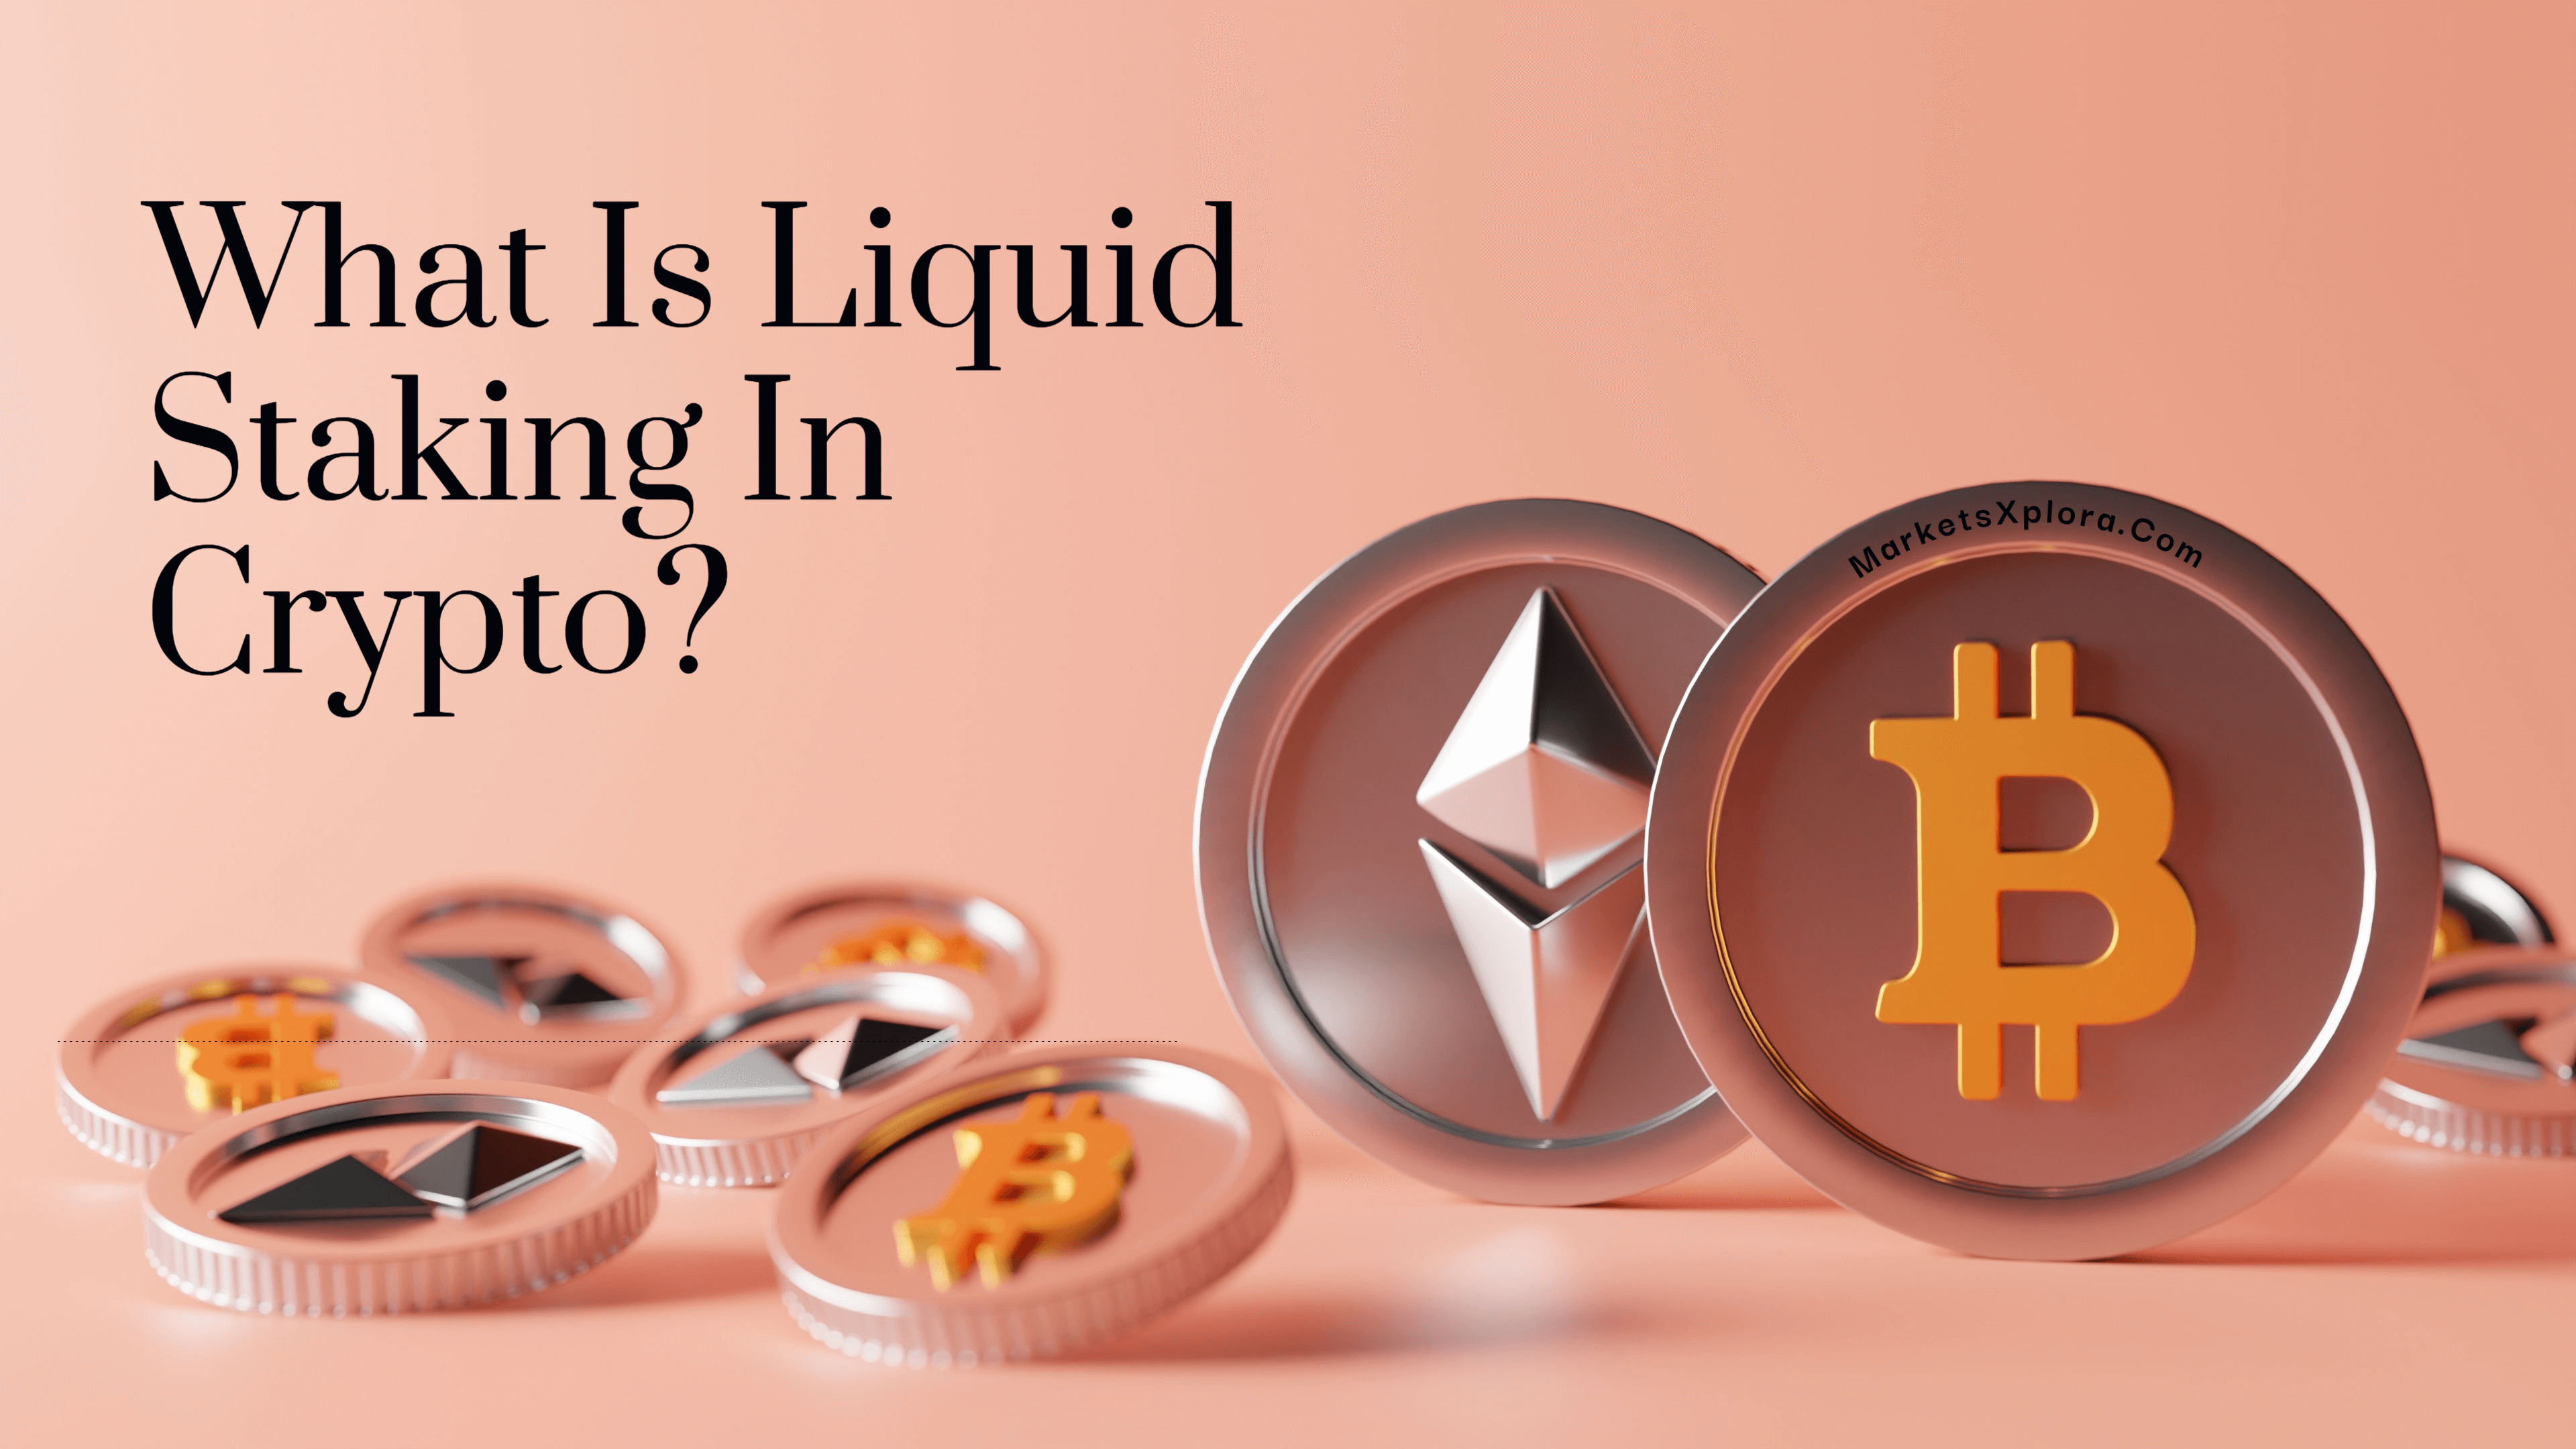 What Is Liquid Staking in Crypto? Liquid Staking Explained